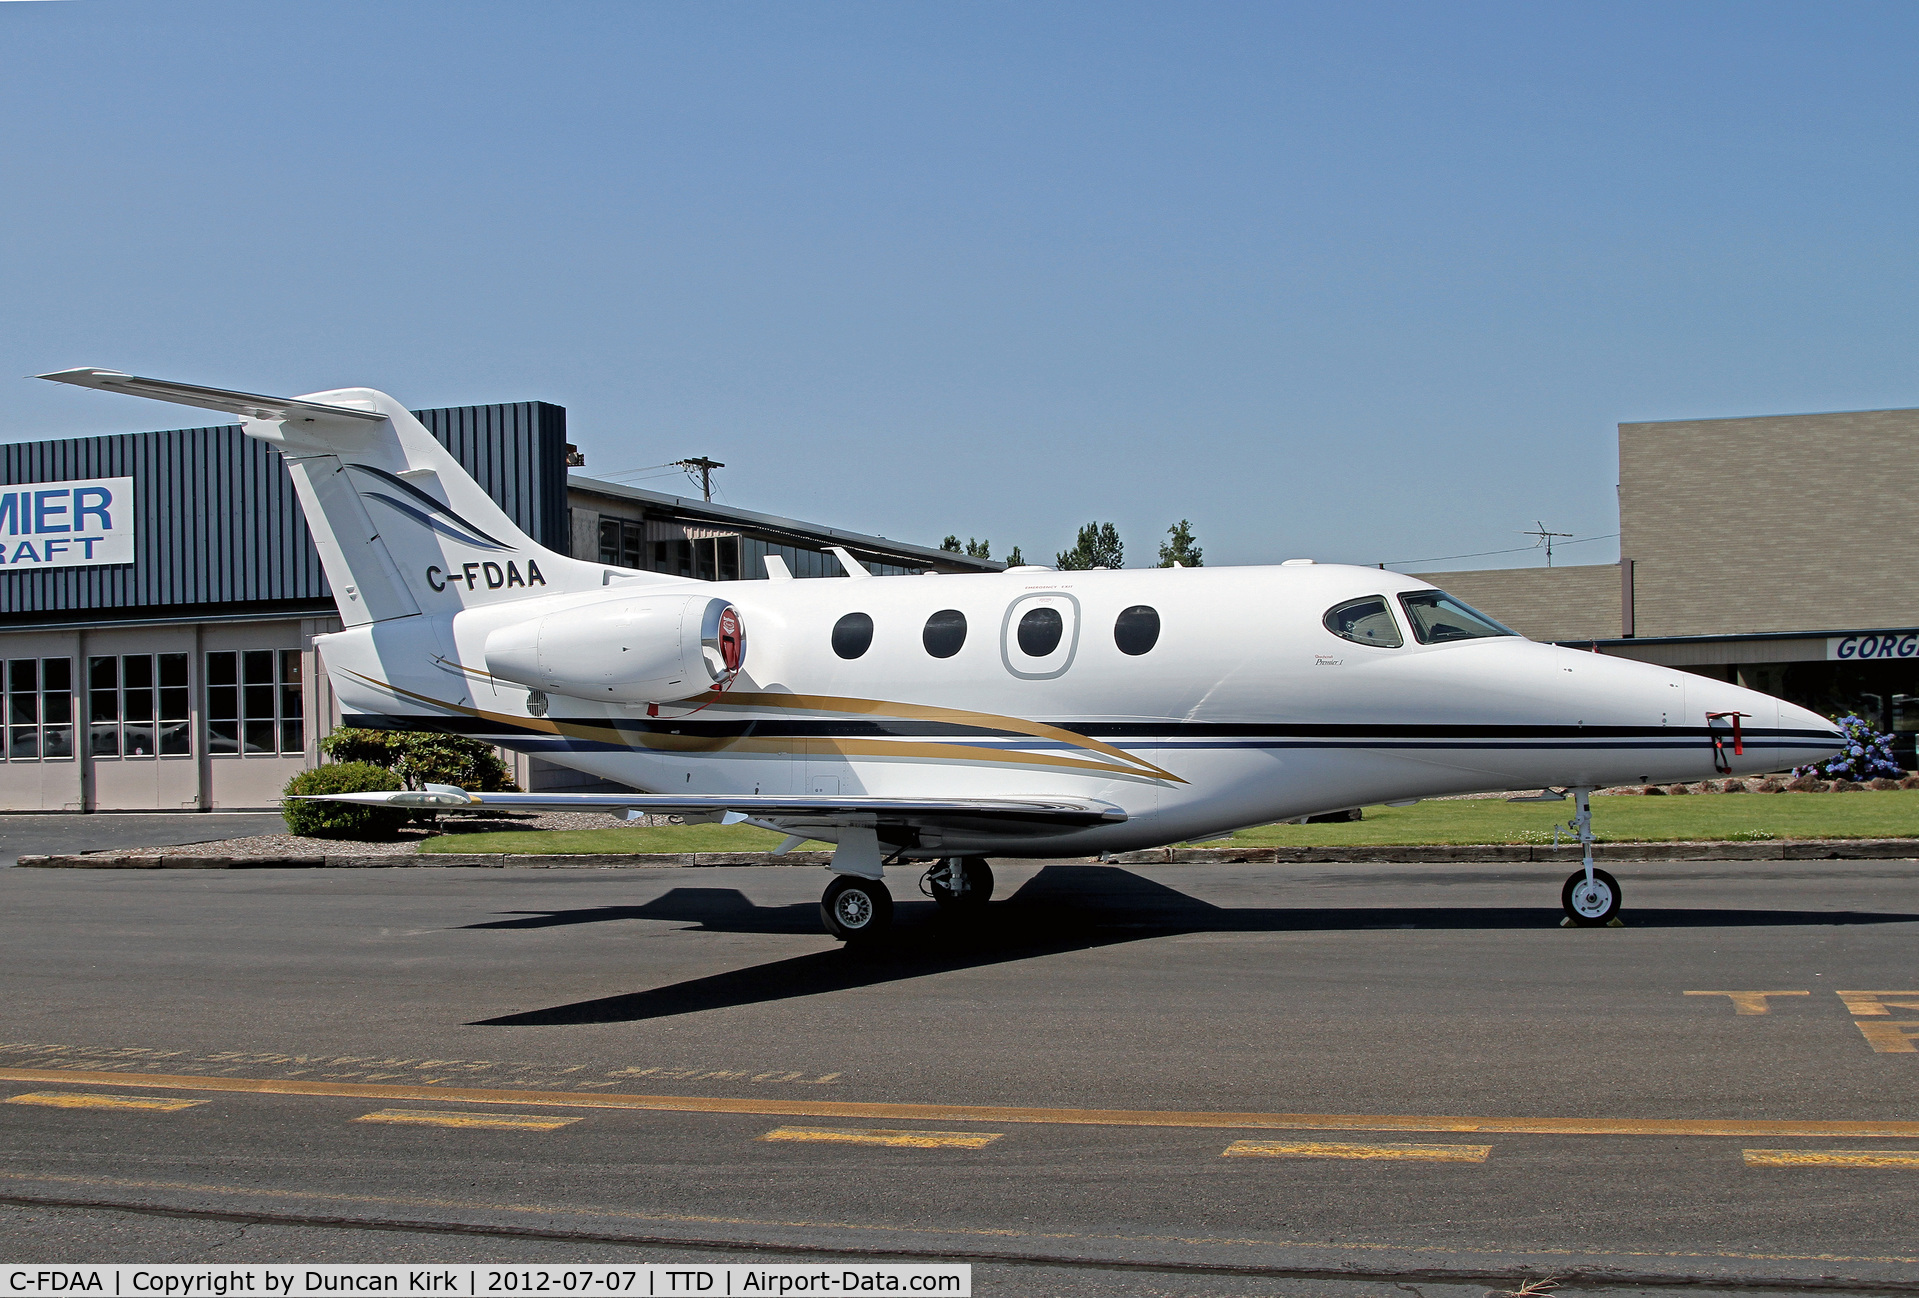 C-FDAA, 2003 Beech 390 Premier 1 C/N RB-58, Basking in the sun at Troutdale